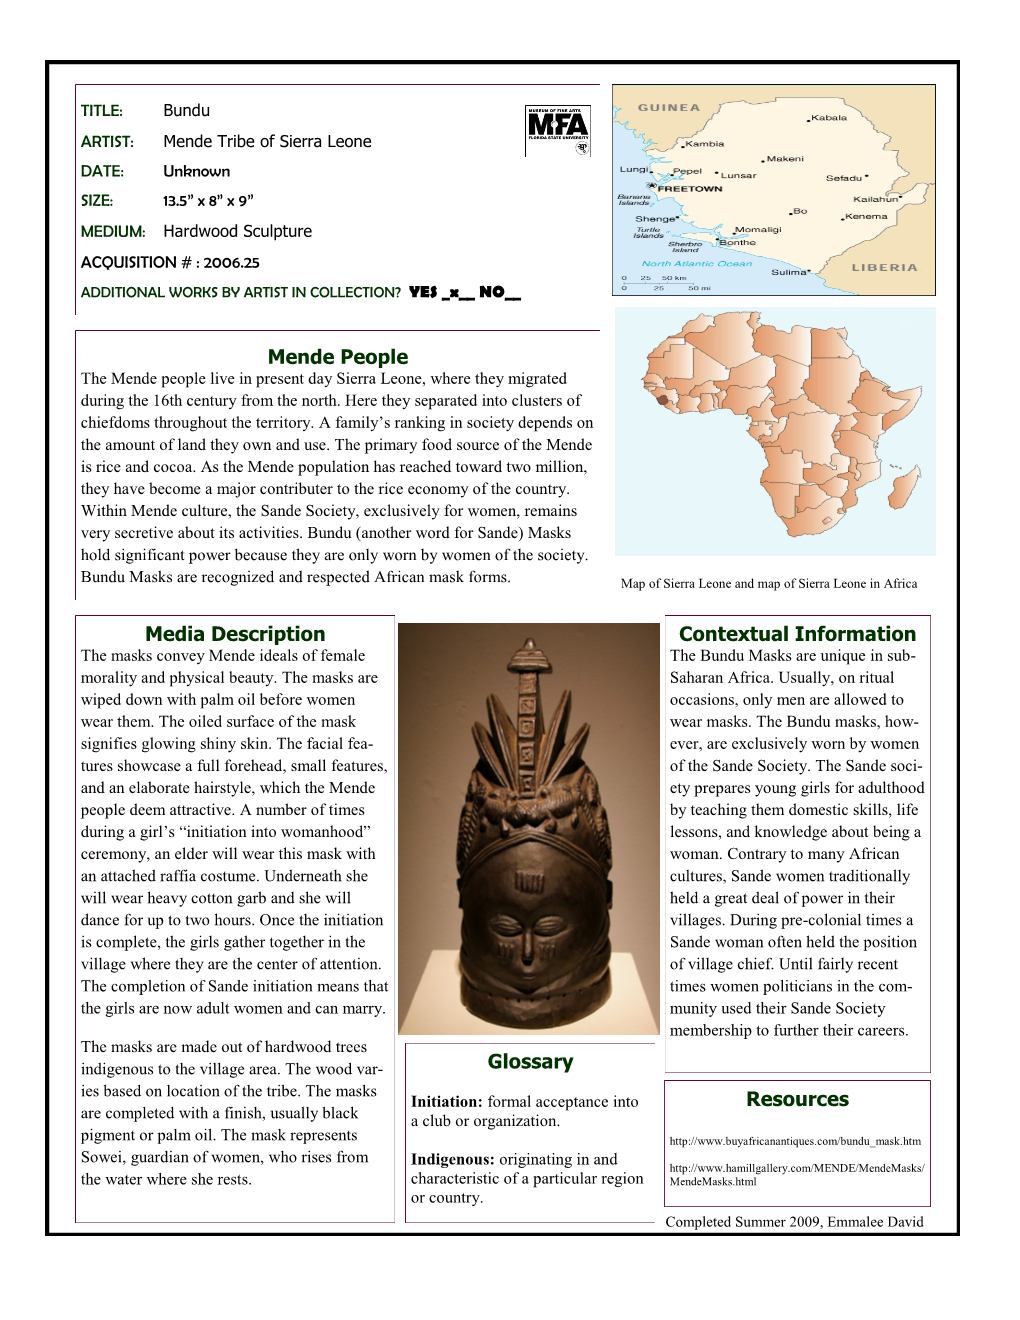 Mende People Glossary Contextual Information Resources Media Description